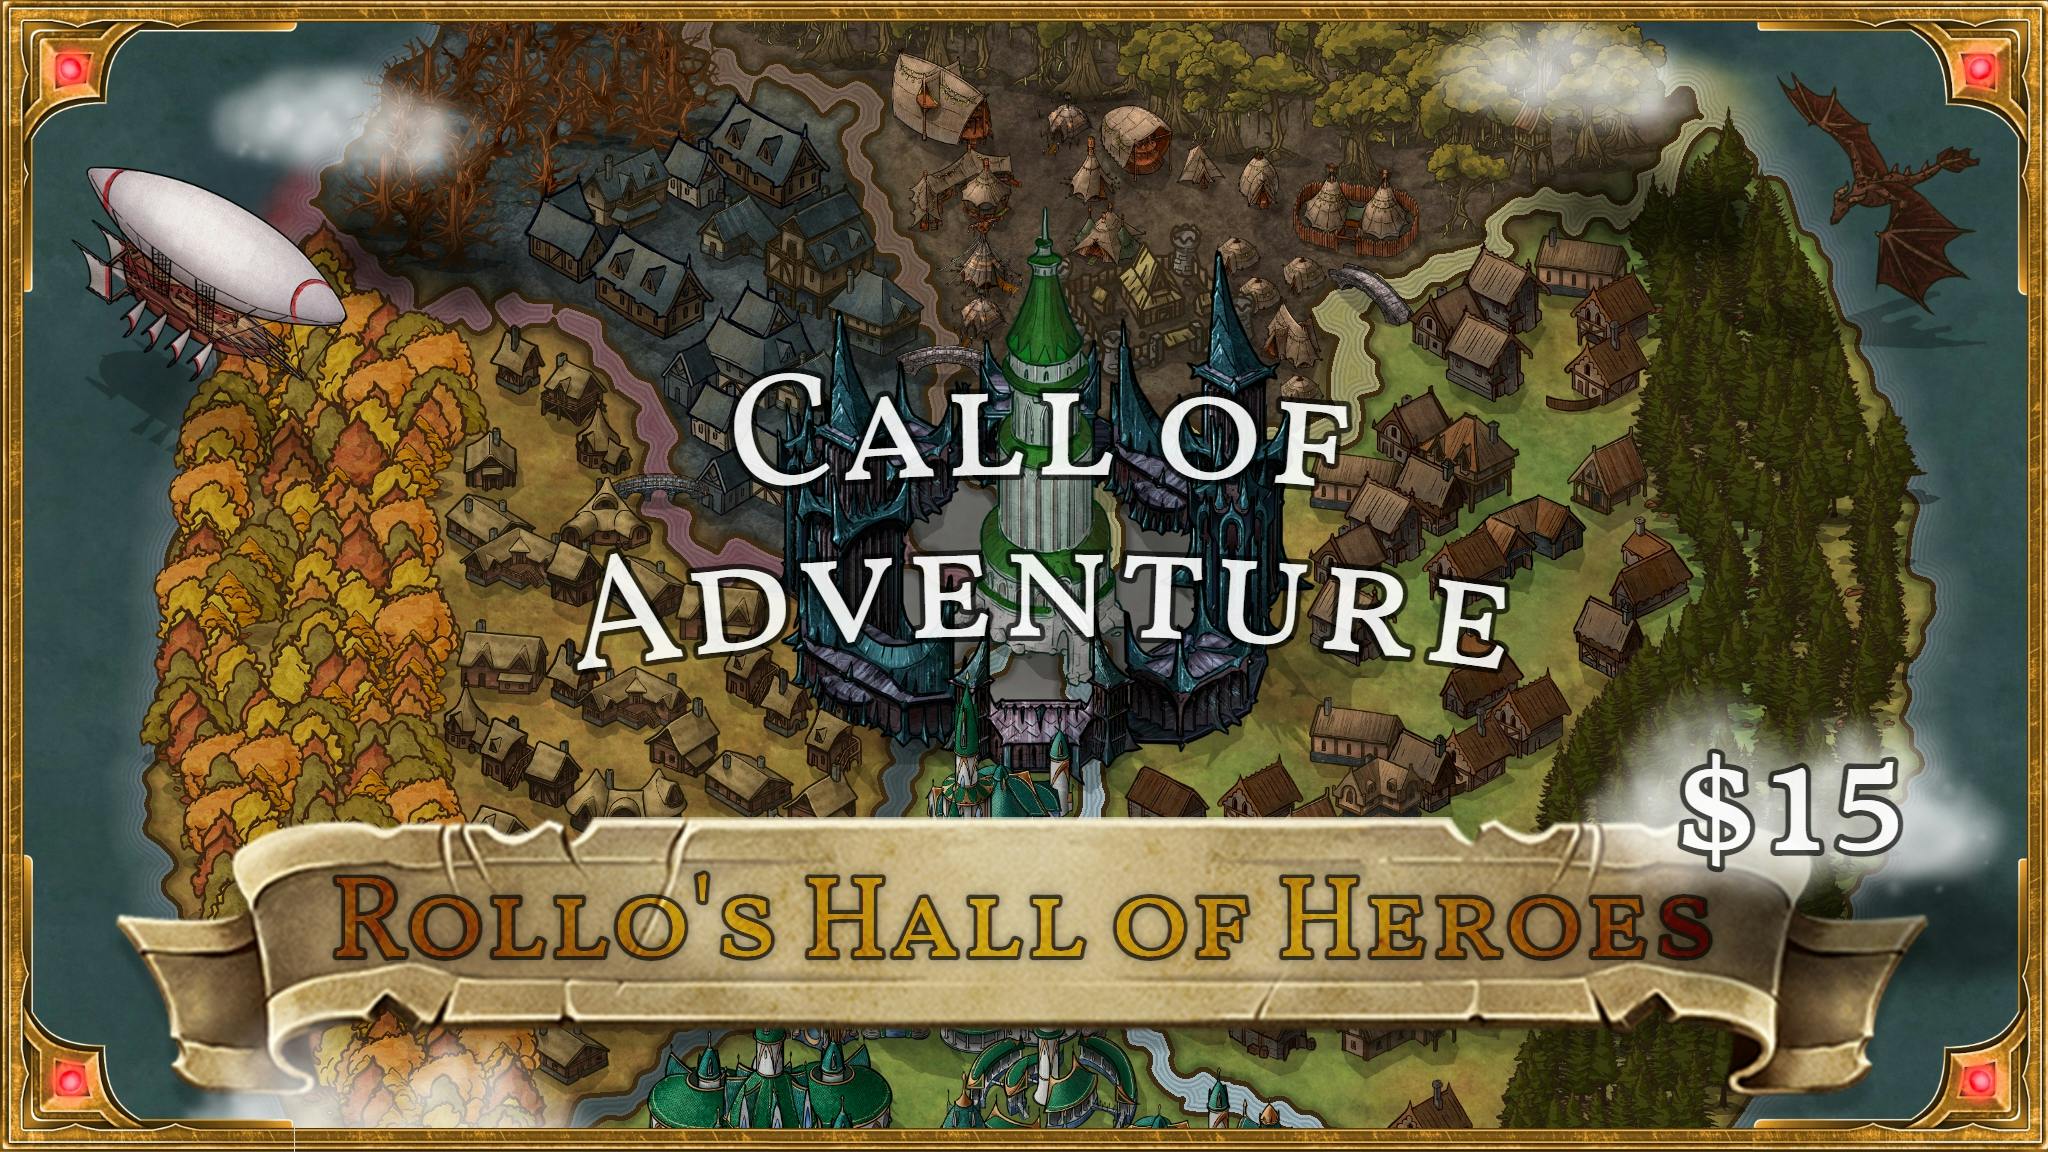 Rollo's Hall of Heroes: Call of Adventure